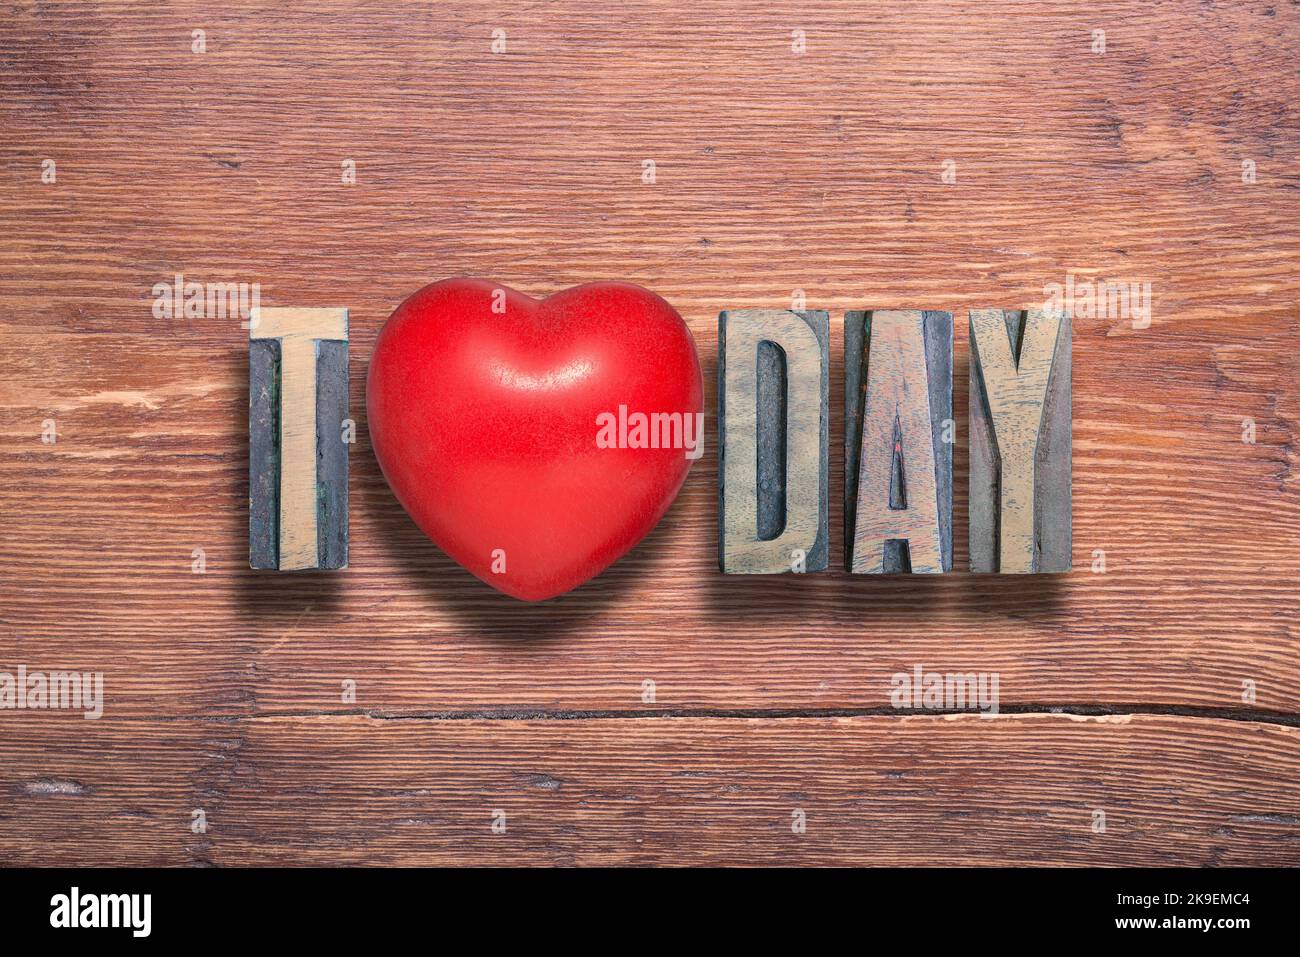 today word combined on vintage varnished wooden surface with heart symbol inside Stock Photo